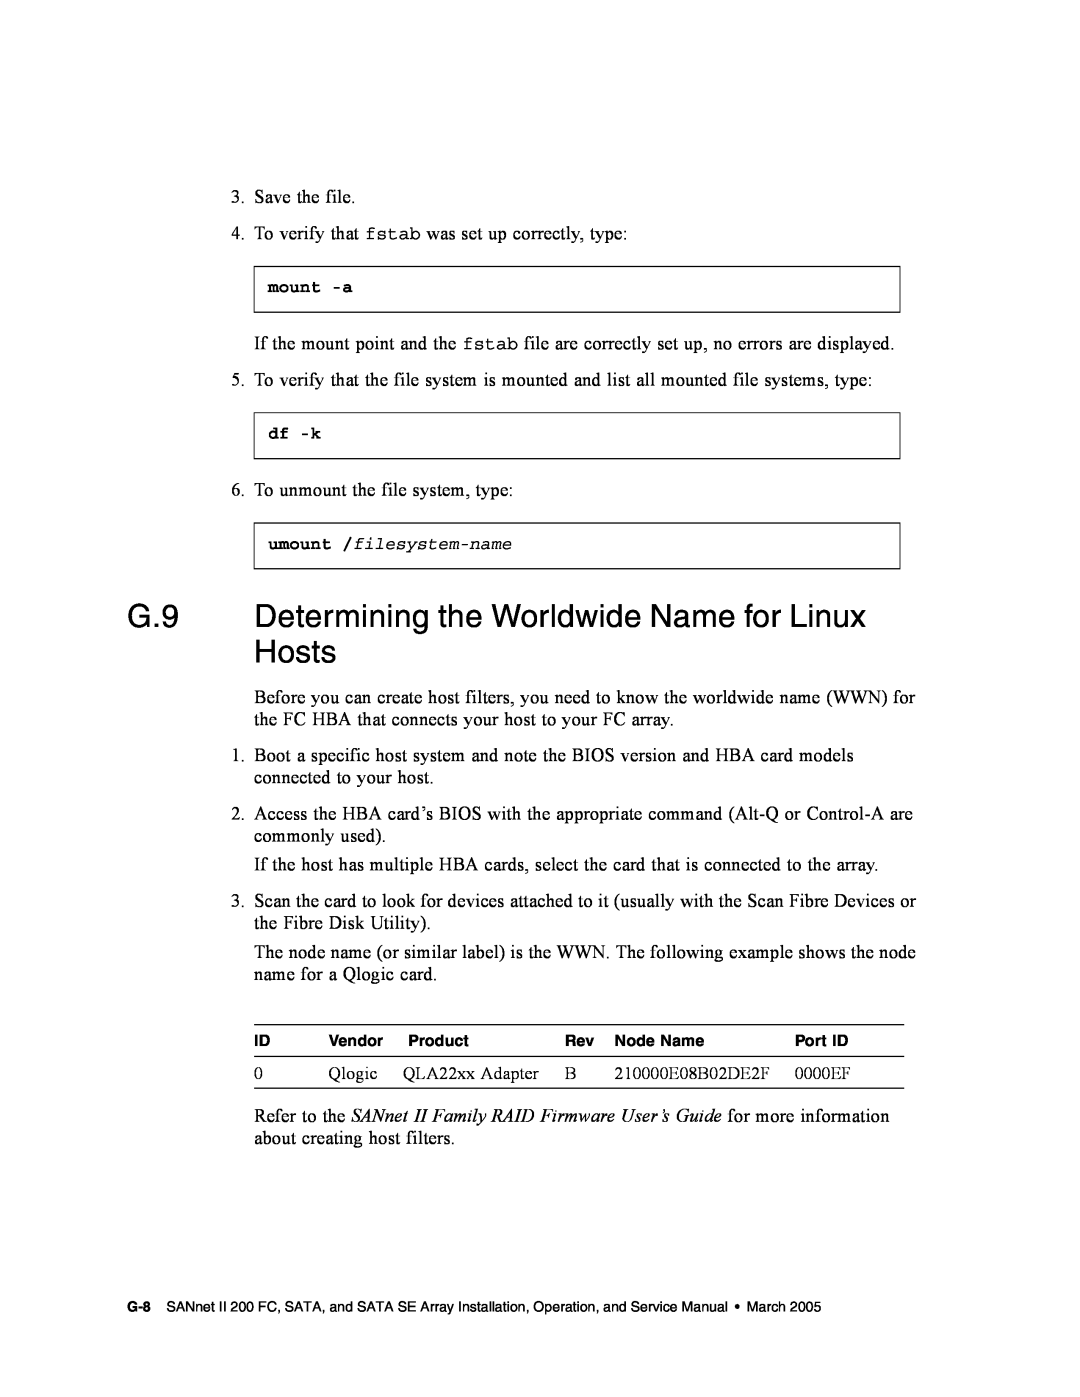 Dot Hill Systems II 200 FC service manual G.9 Determining the Worldwide Name for Linux Hosts, mount -a, df -k 